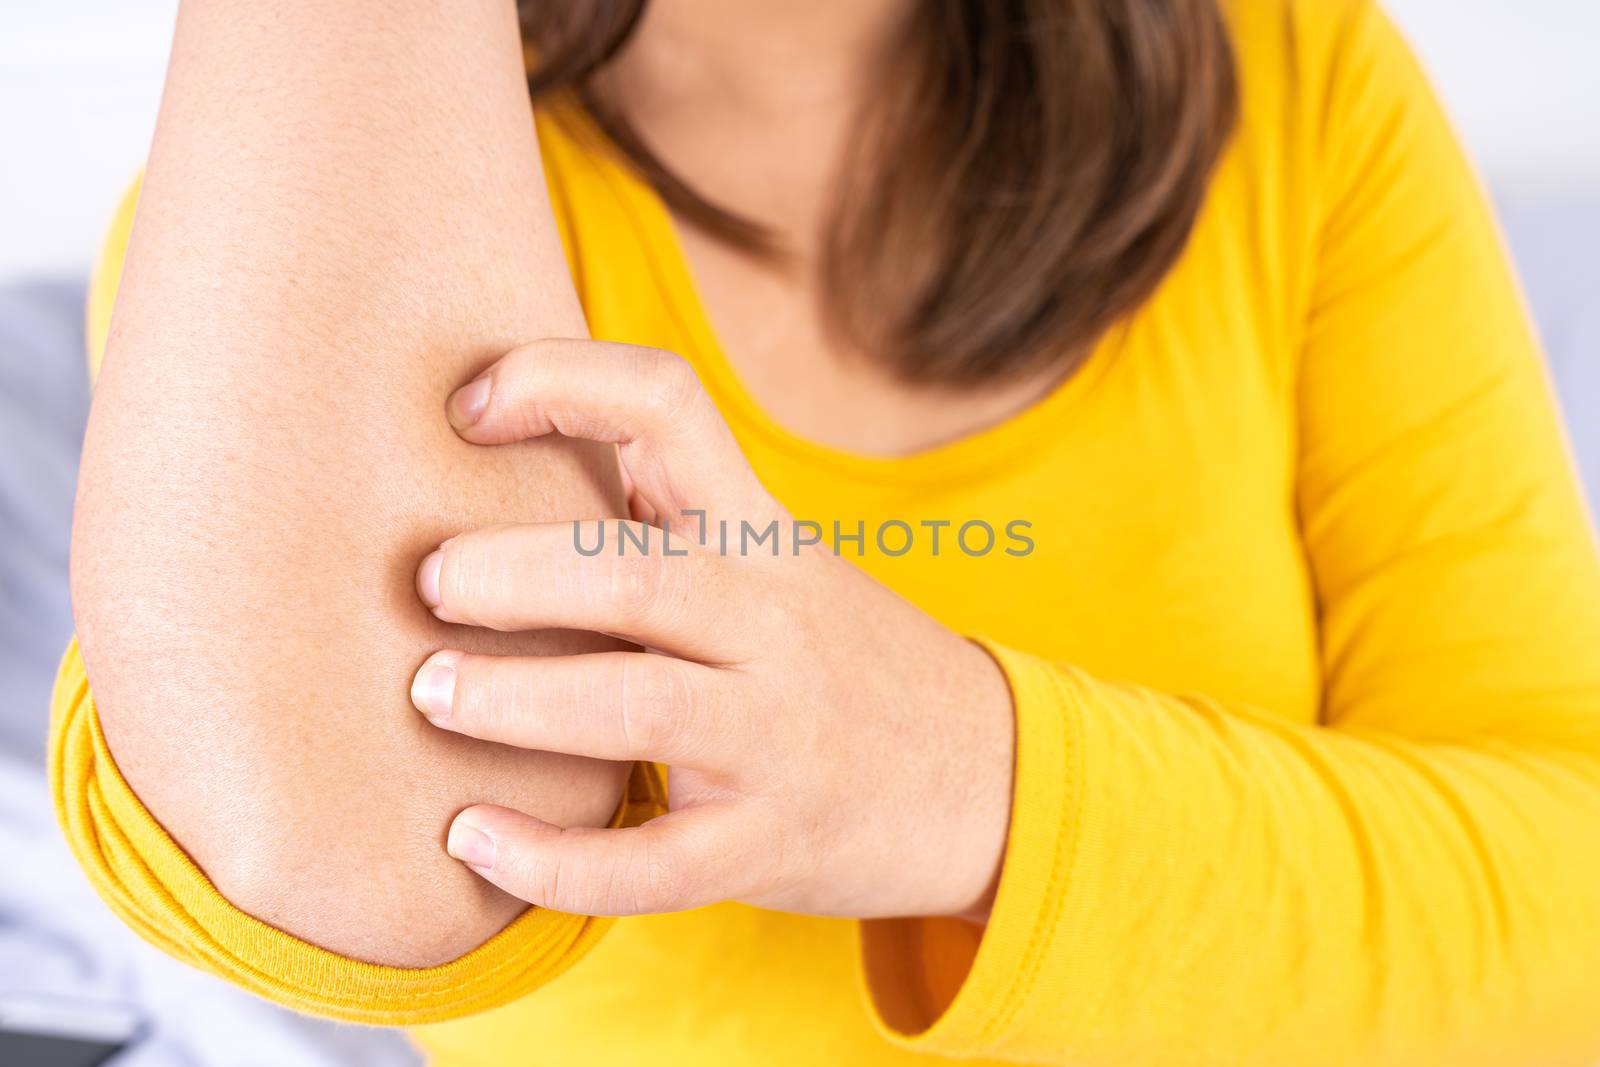 Female scratching her arm on white background with copy space. Medical, healthcare for advertising concept.